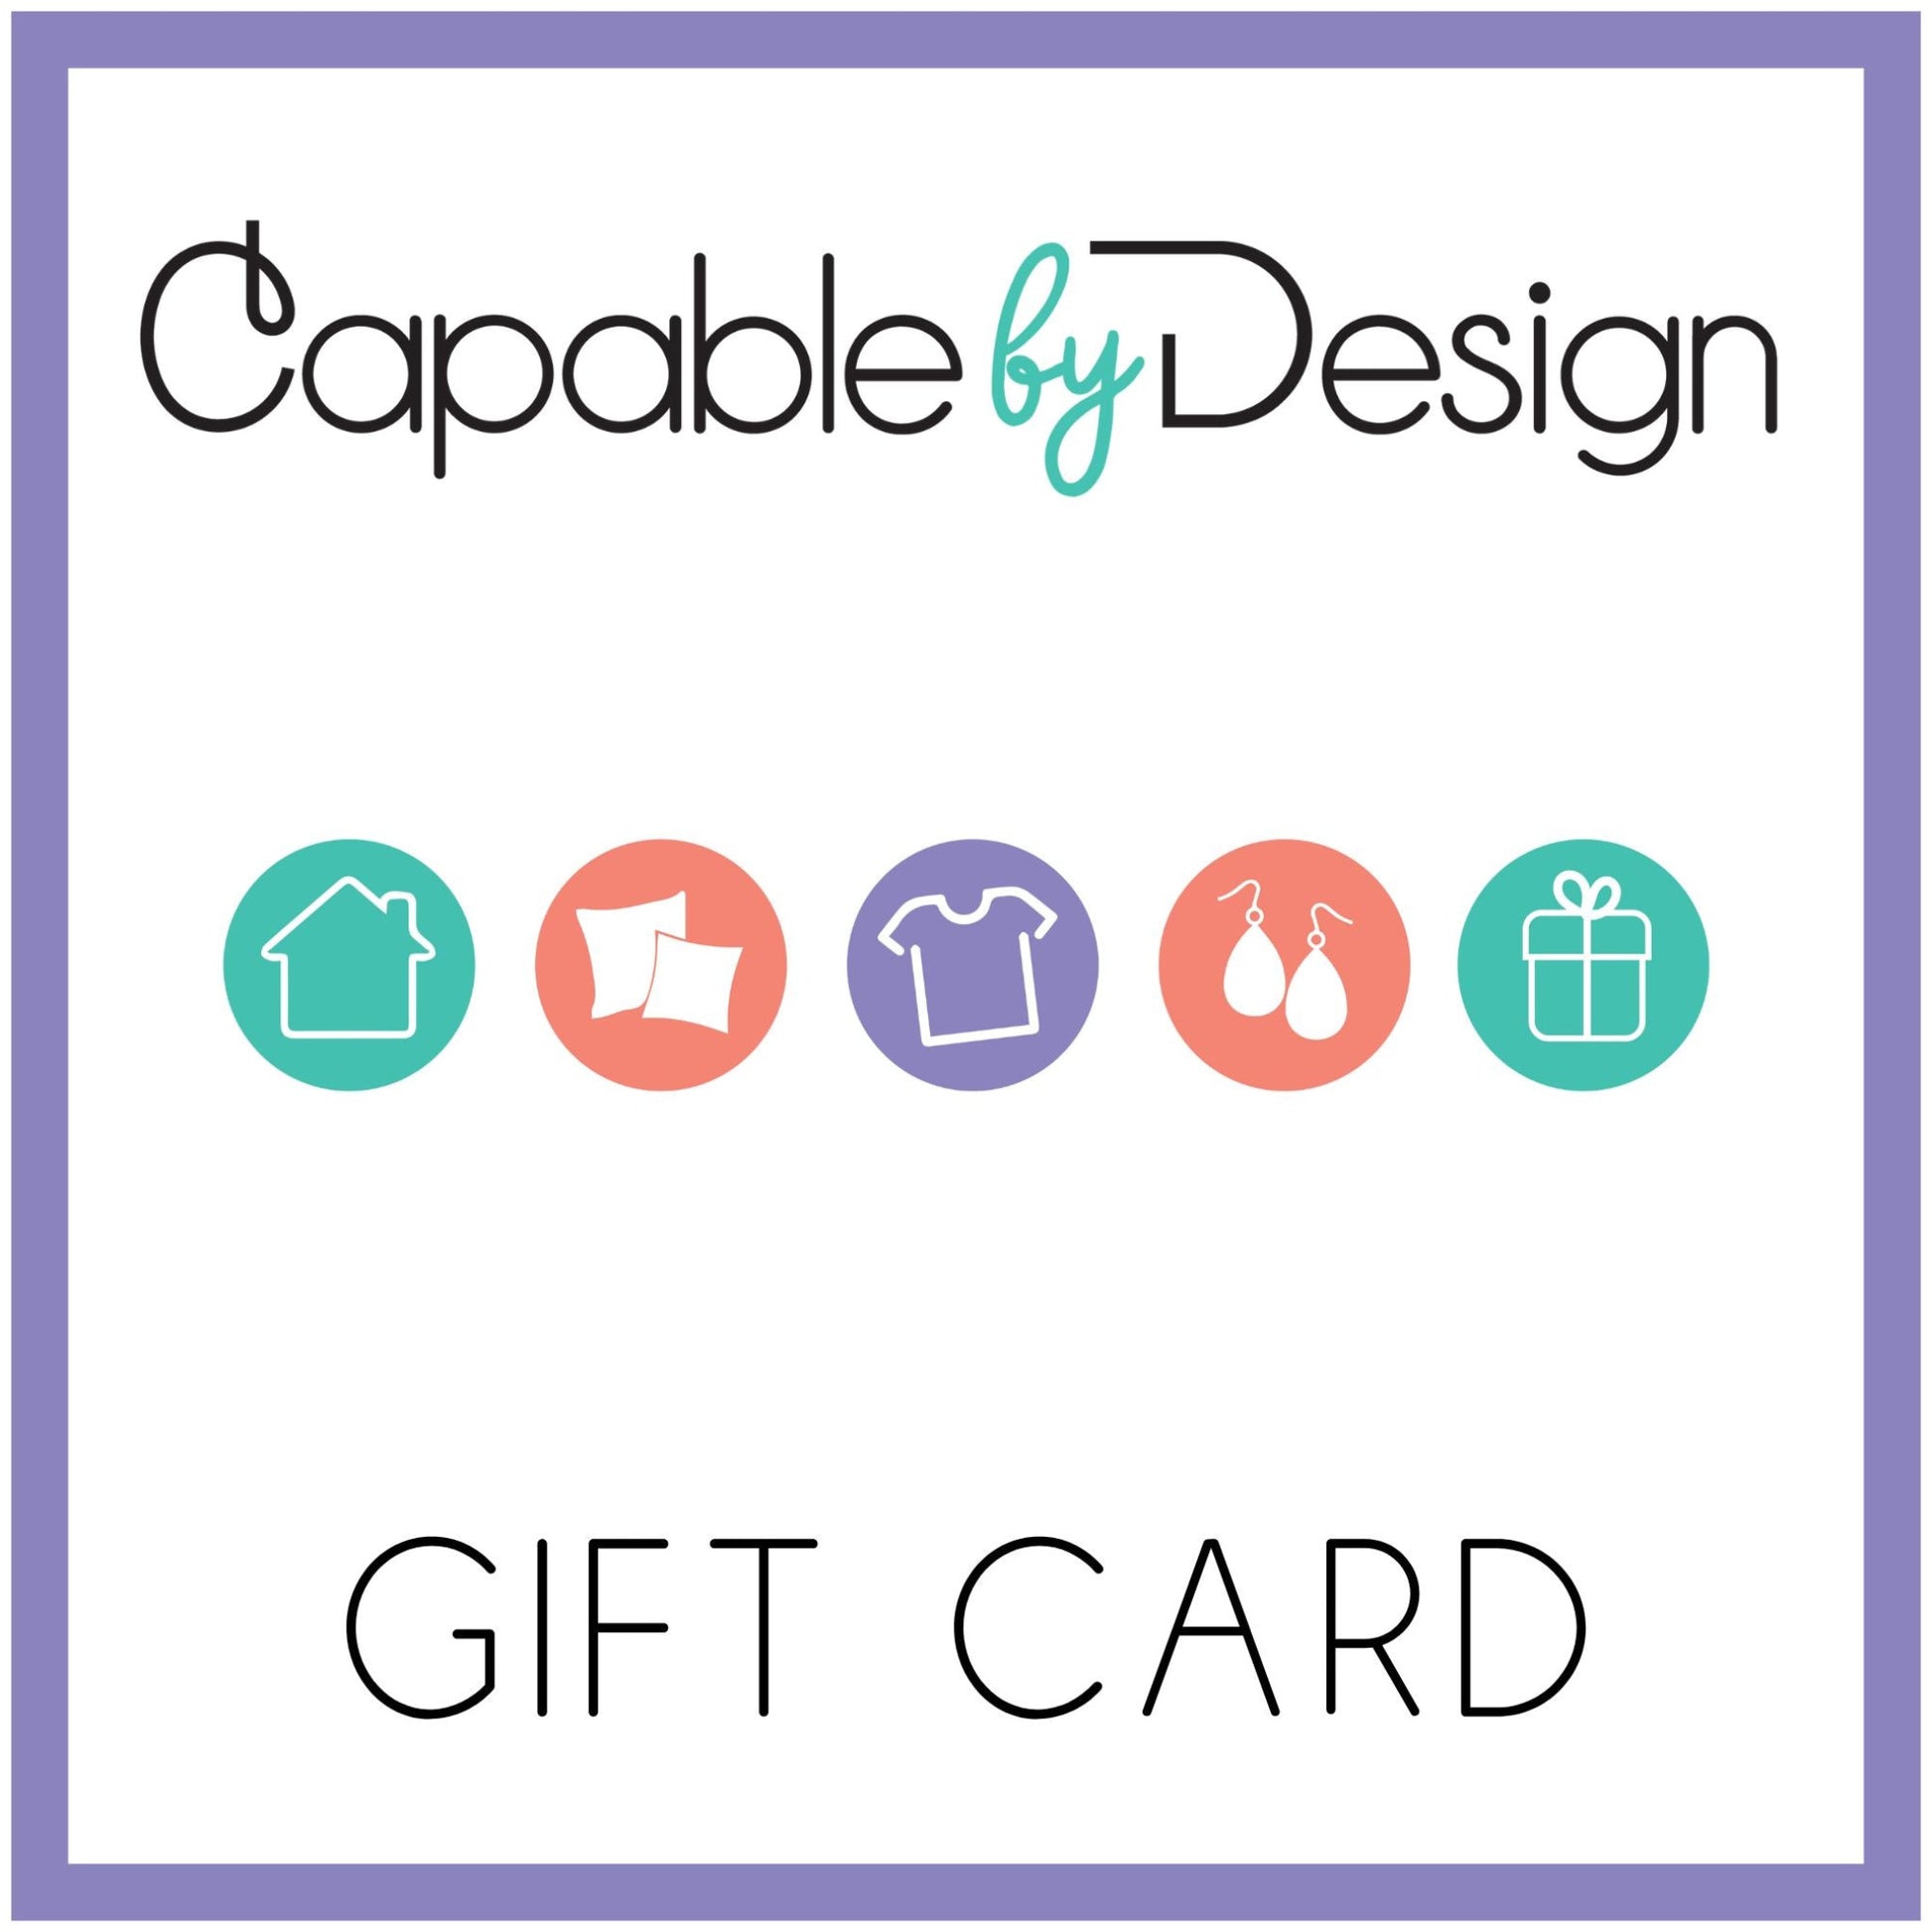 Capable by Design Gift Card